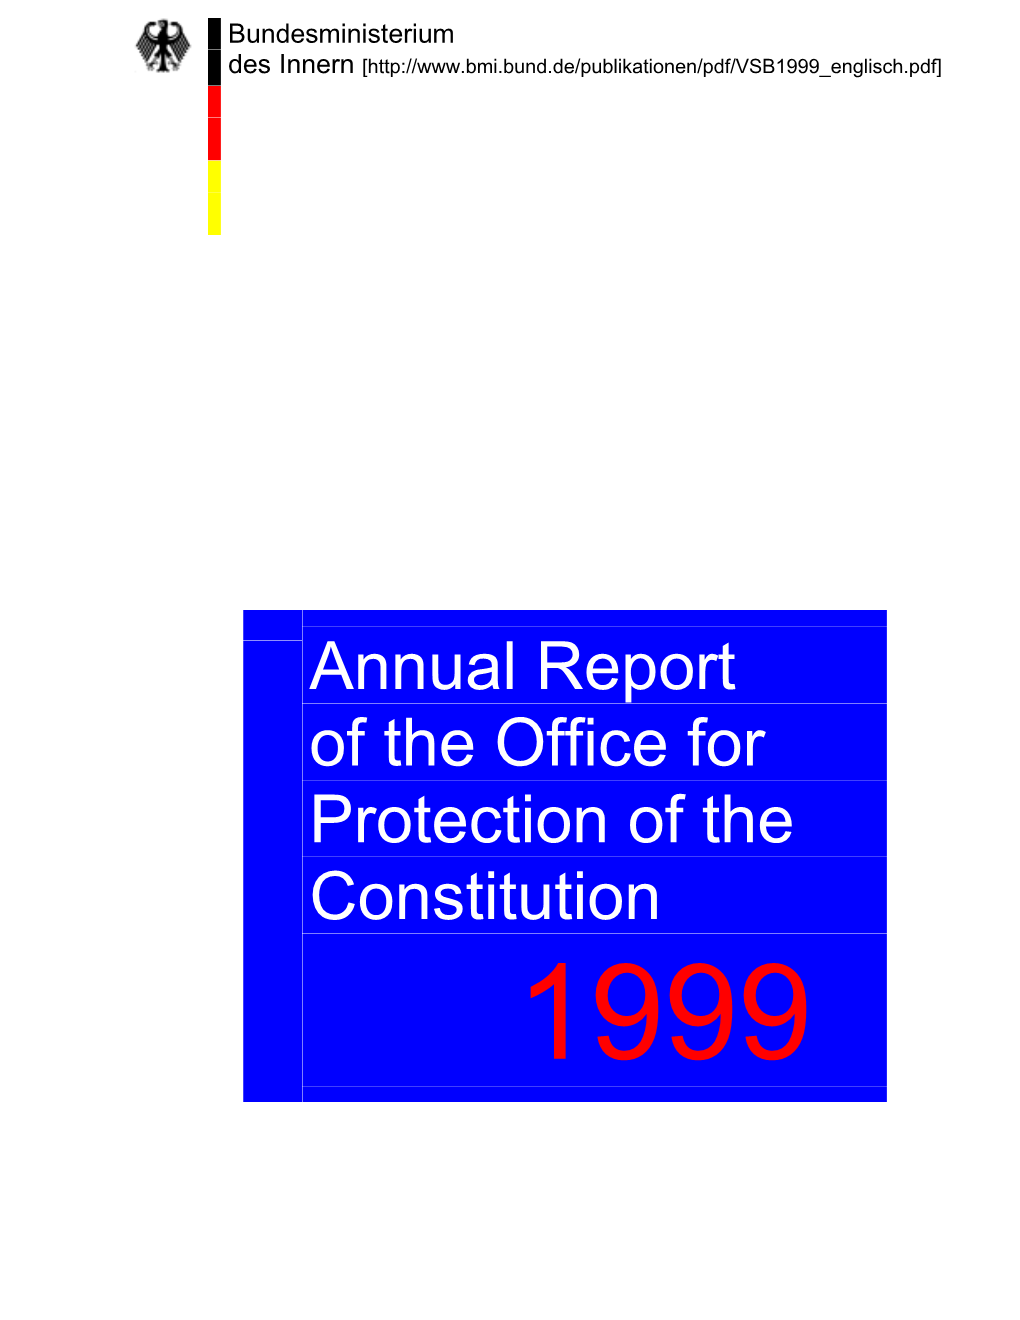 Annual Report of the Office for Protection of the Constitution 1999 Table of Contents